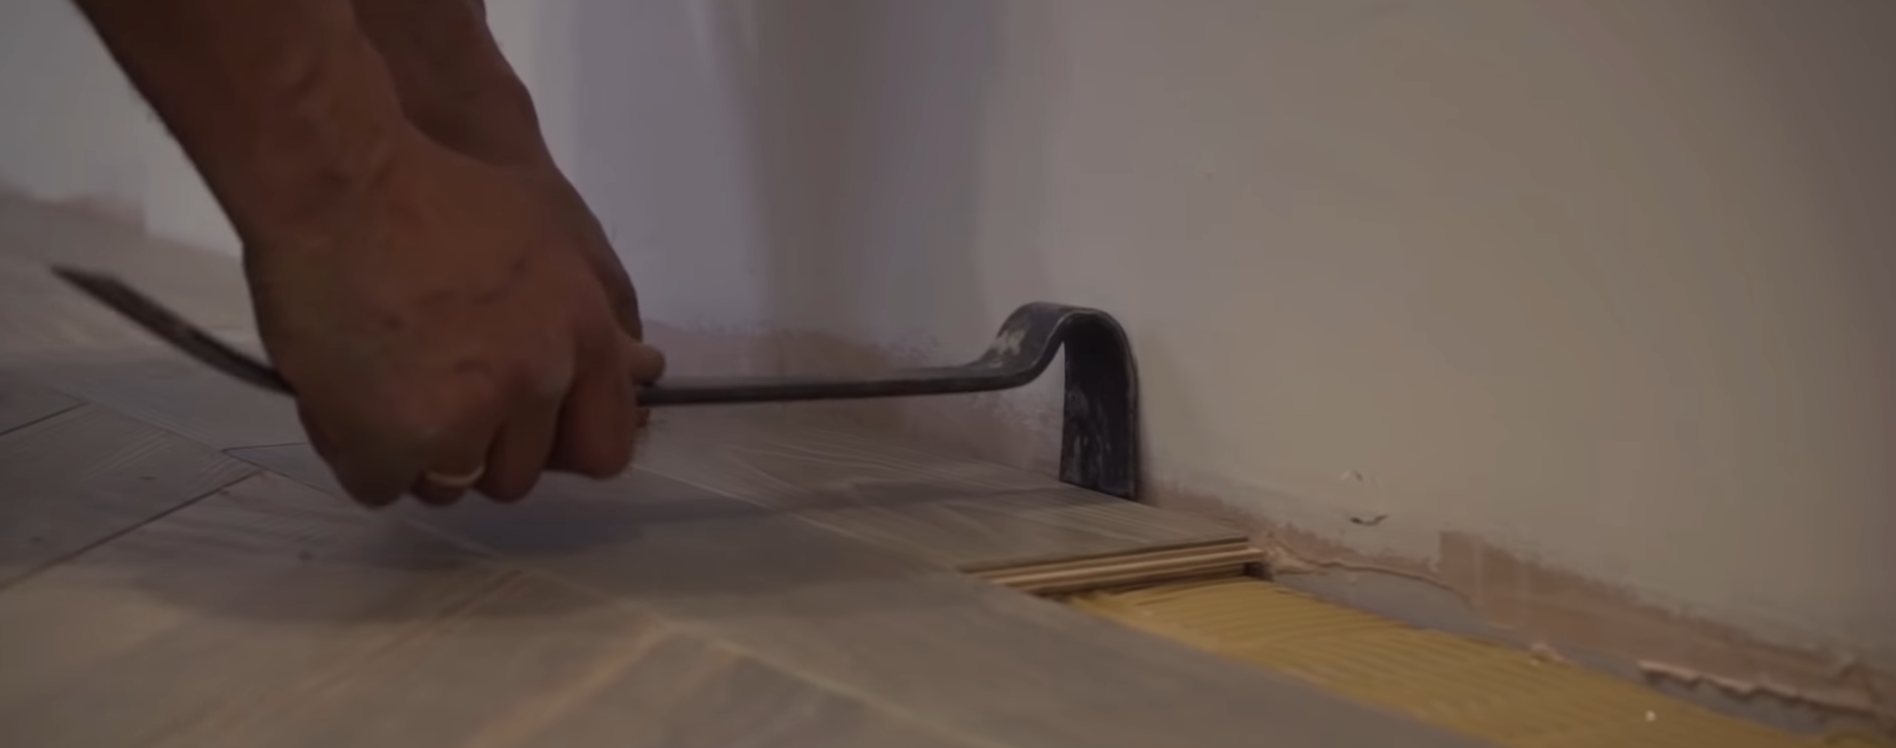 How To Remove Old Wood Flooring That